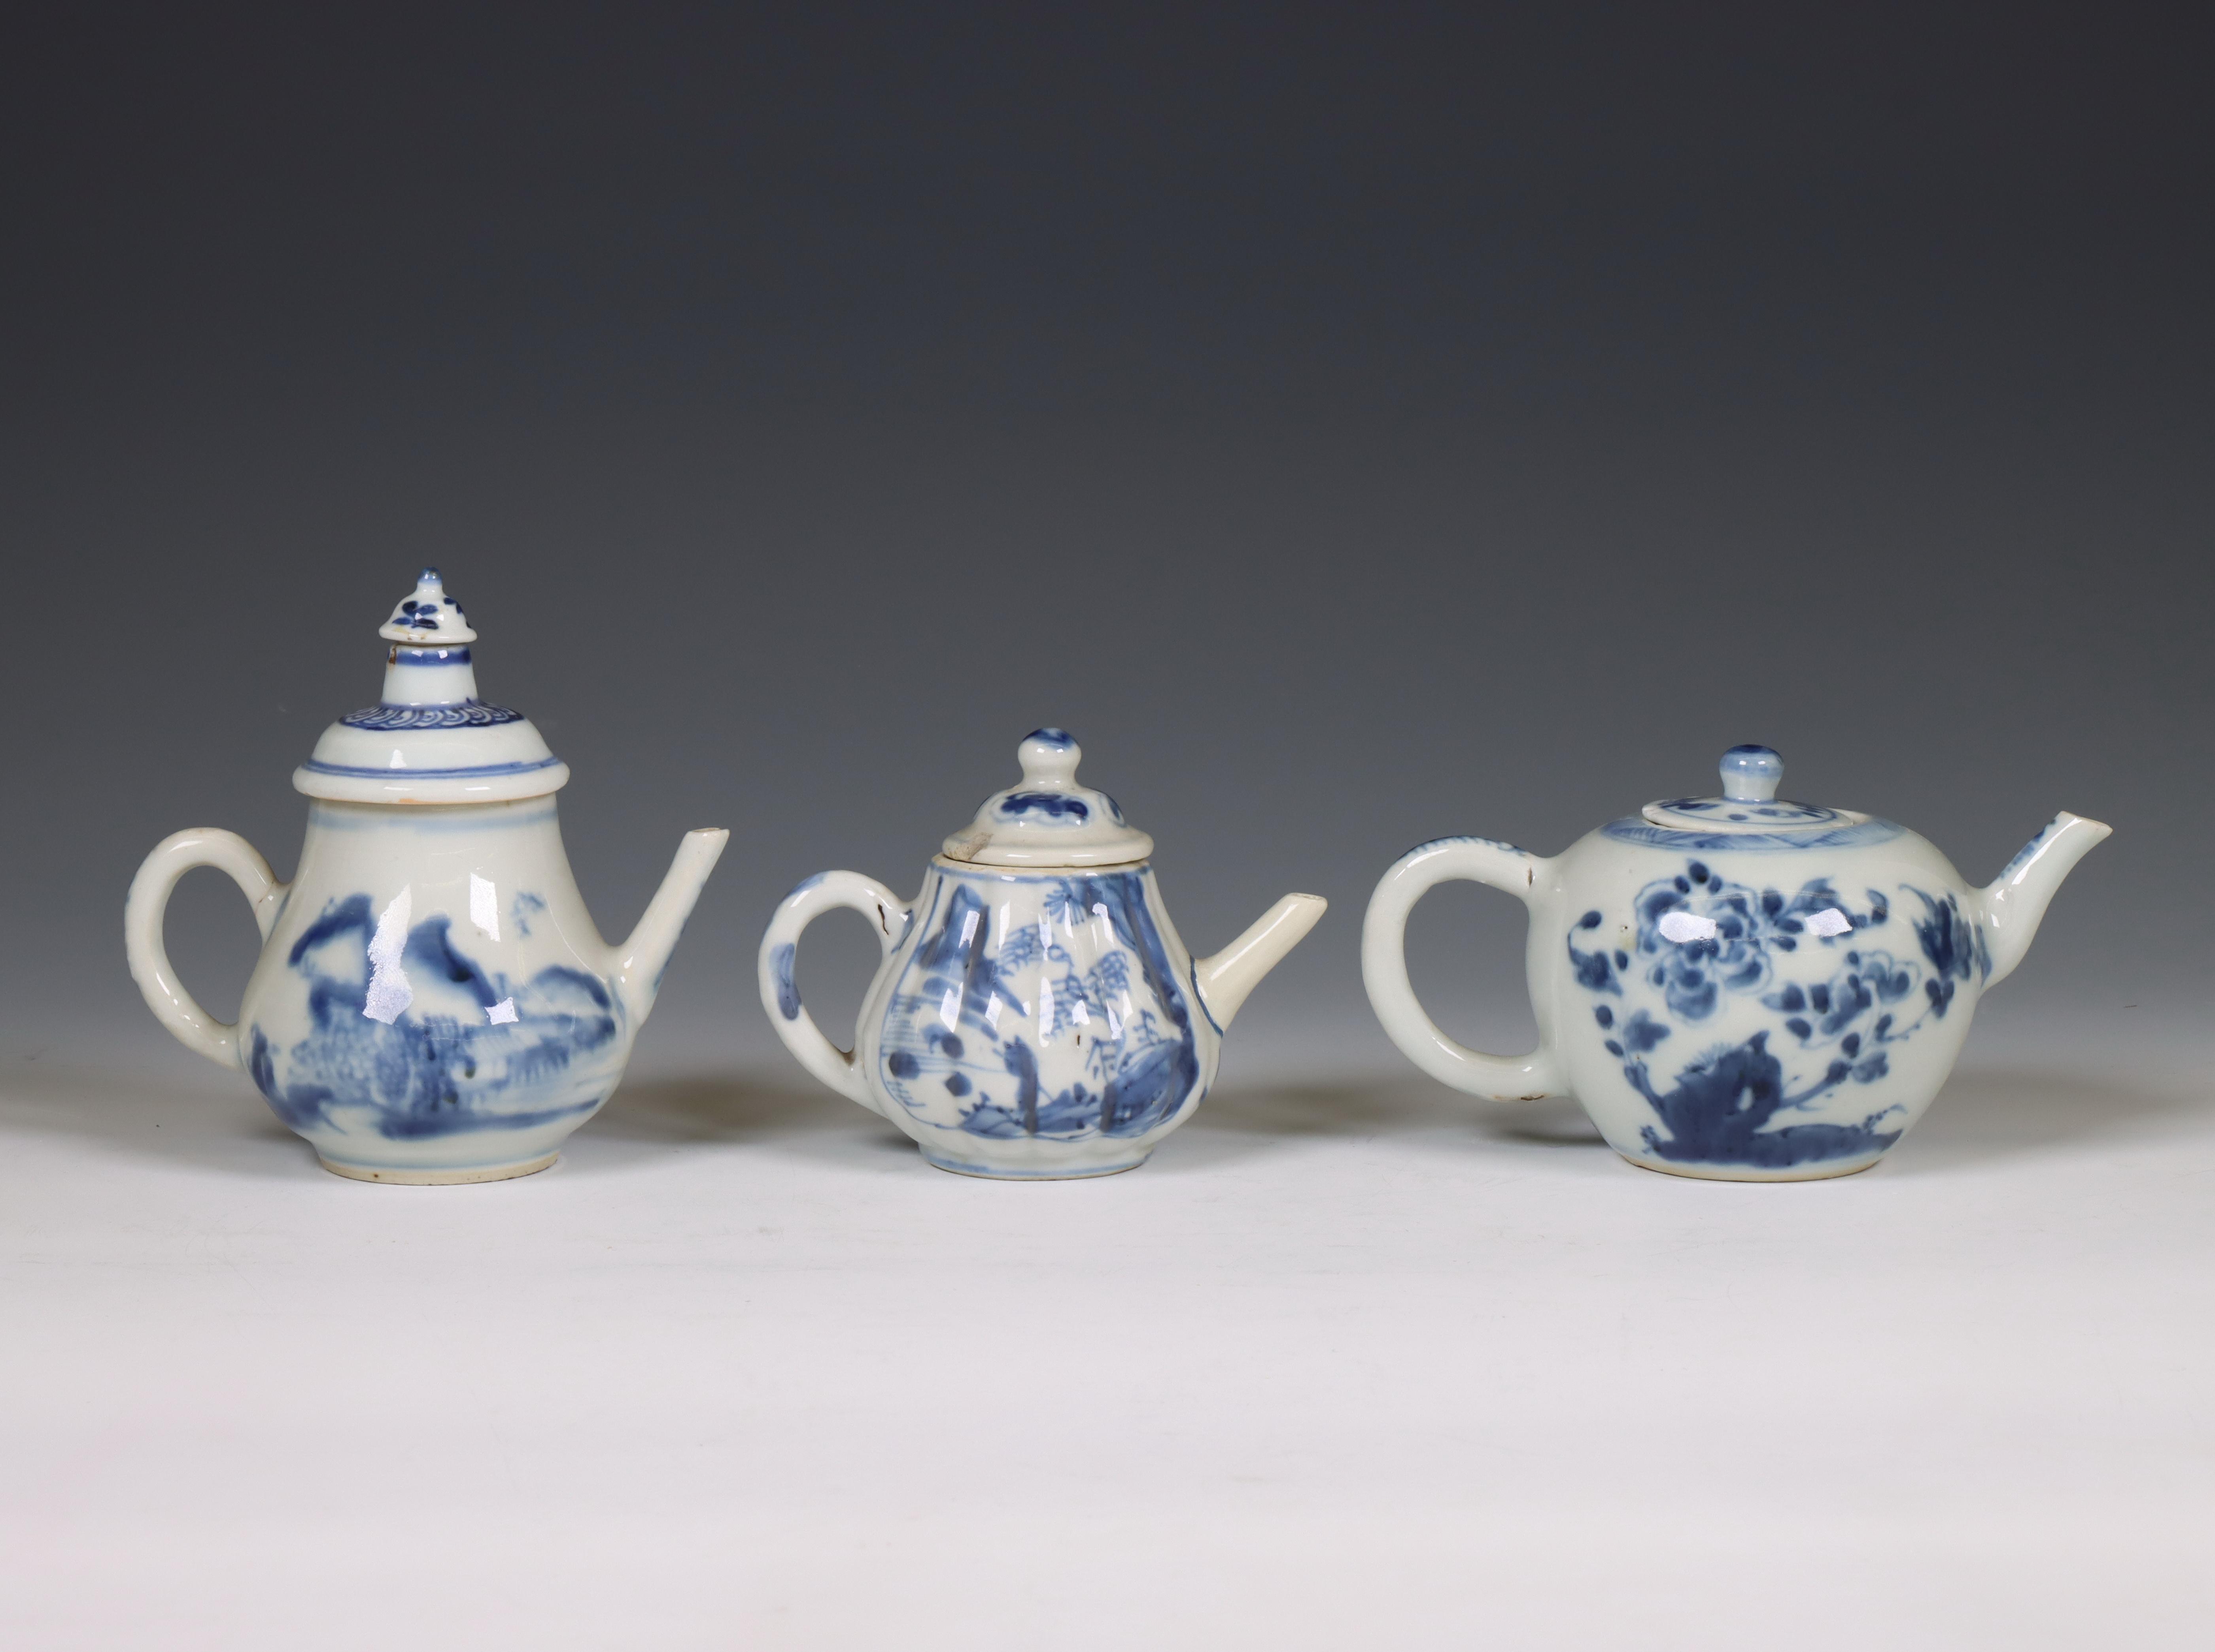 China, three blue and white porcelain teapots, 18th century, - Image 2 of 6